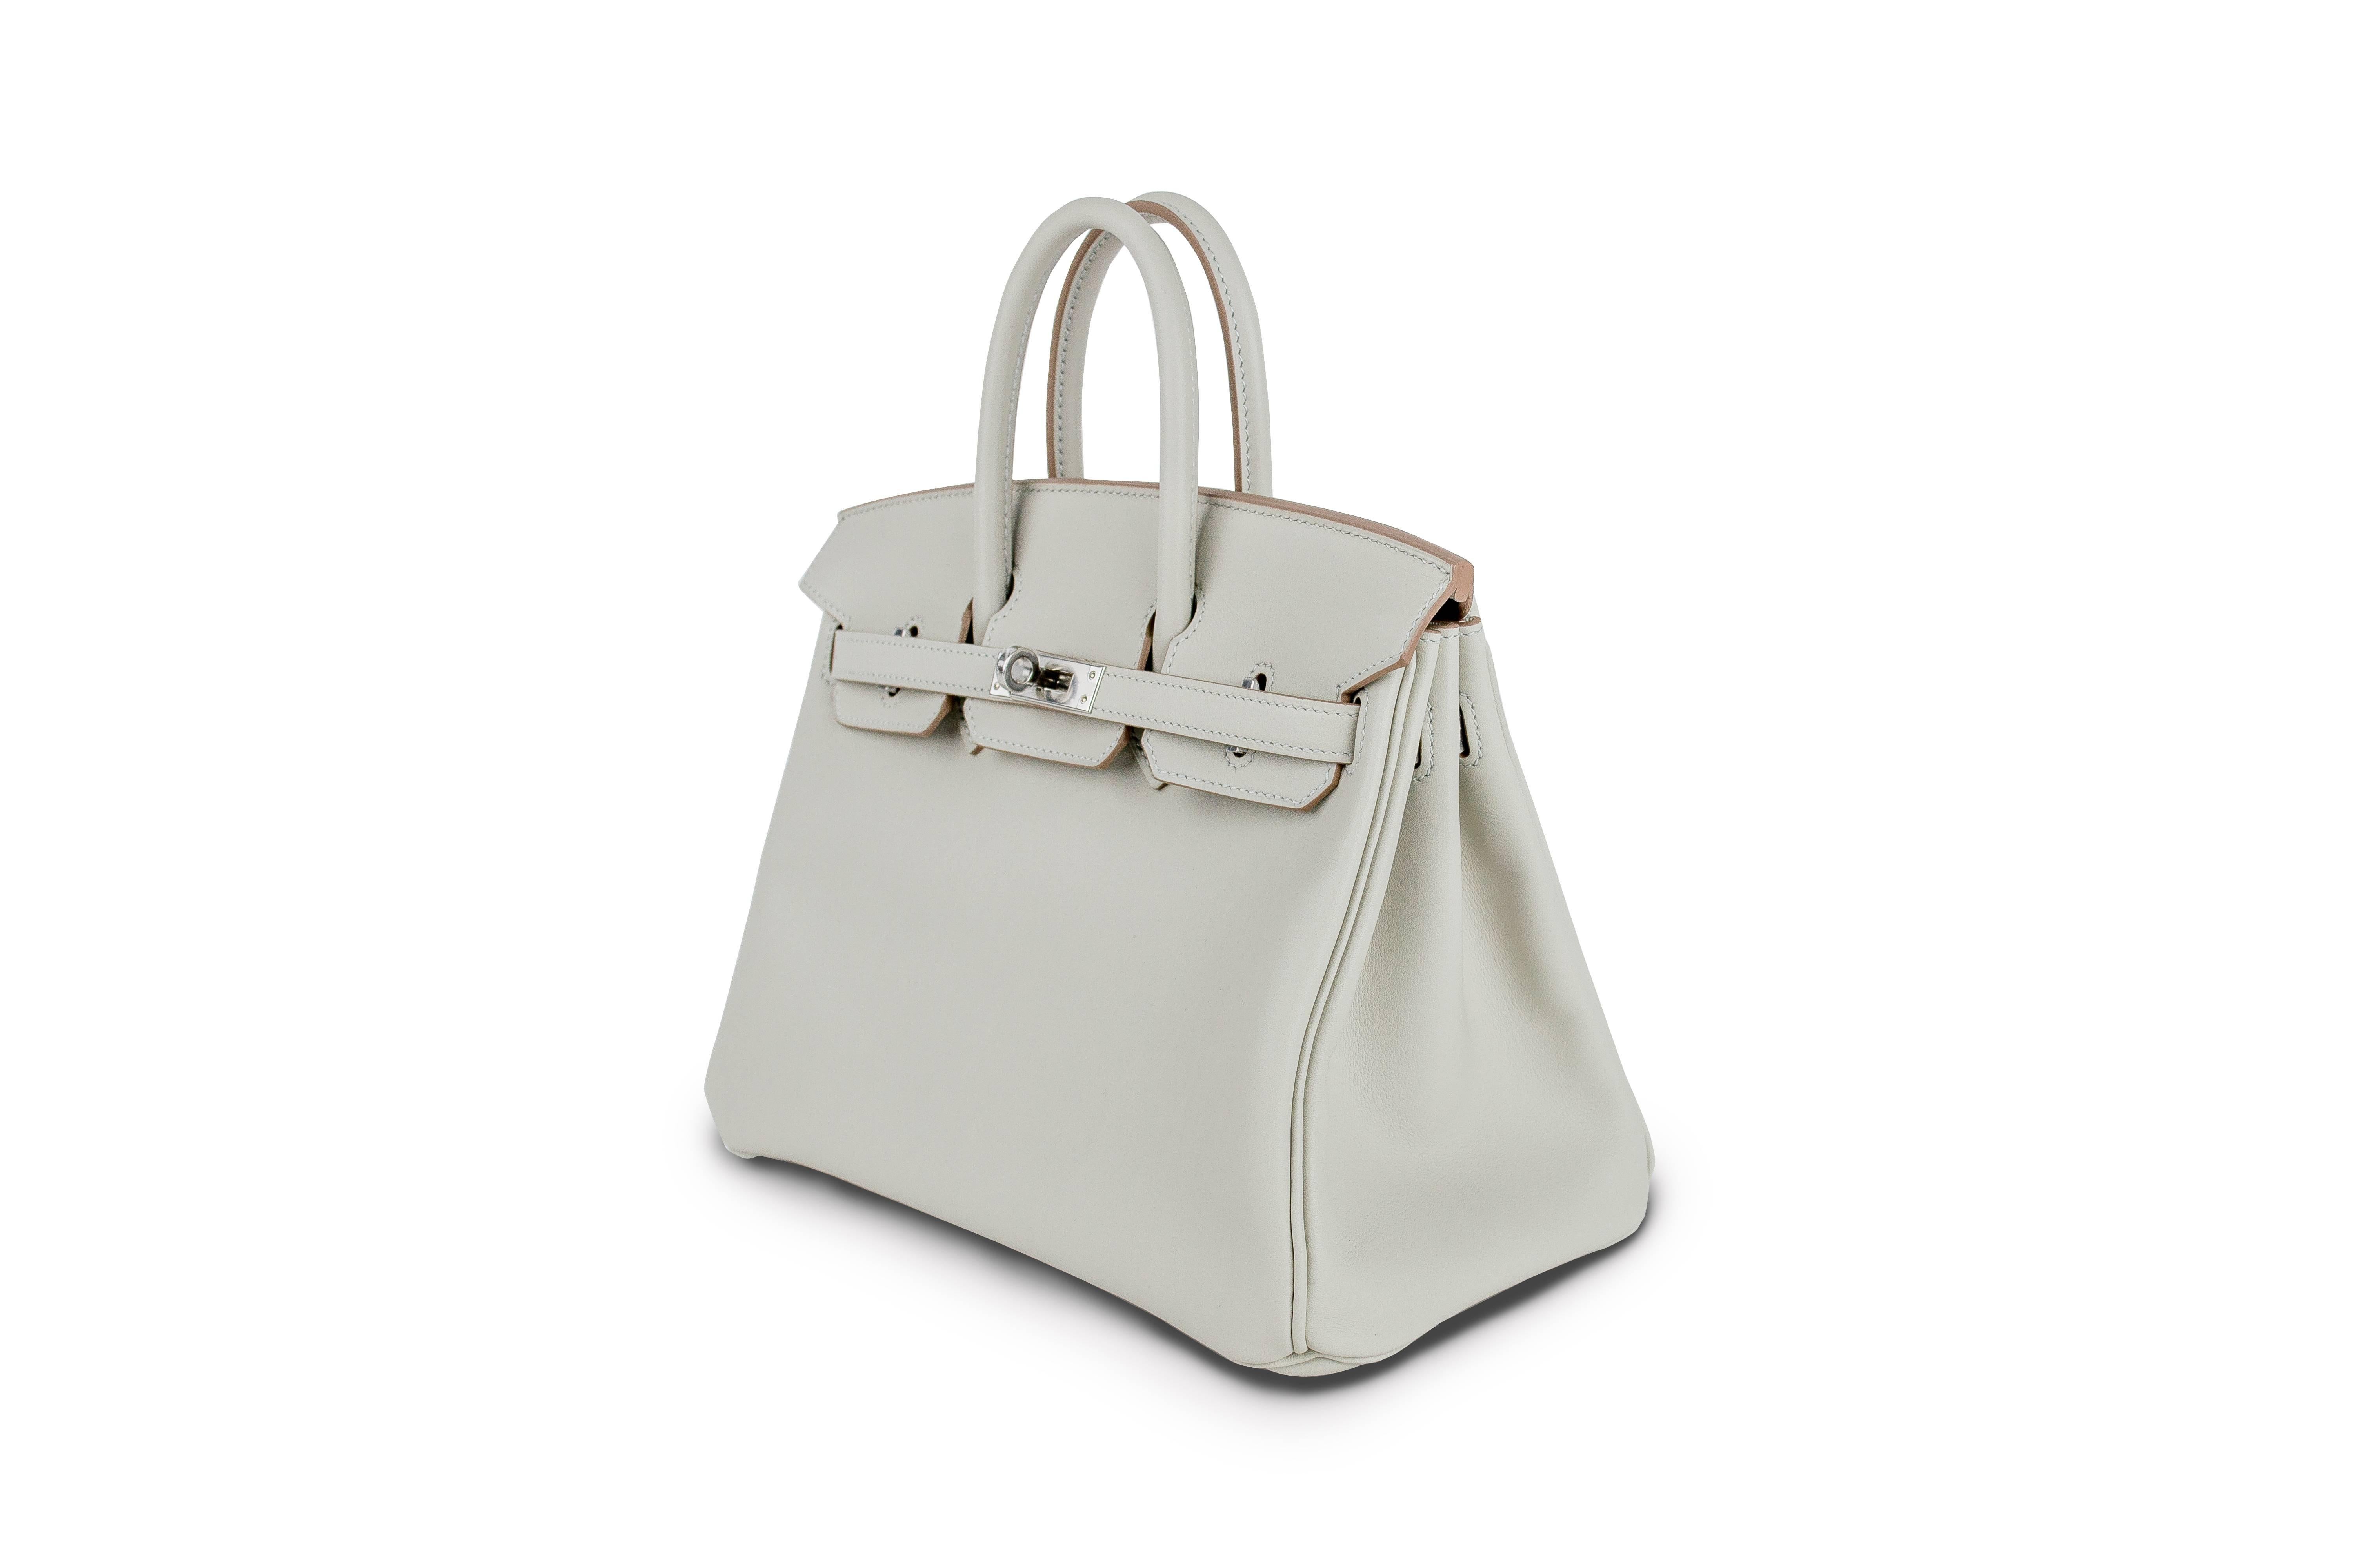 The new Hermès Birkin 25 cm Grey bag is a real masterpiece of the fashion industry. It is made of high quality leather and trimmed with silver accessories. Such handbag is a positional good emphasizing the irreproachable sense of style of its owner,